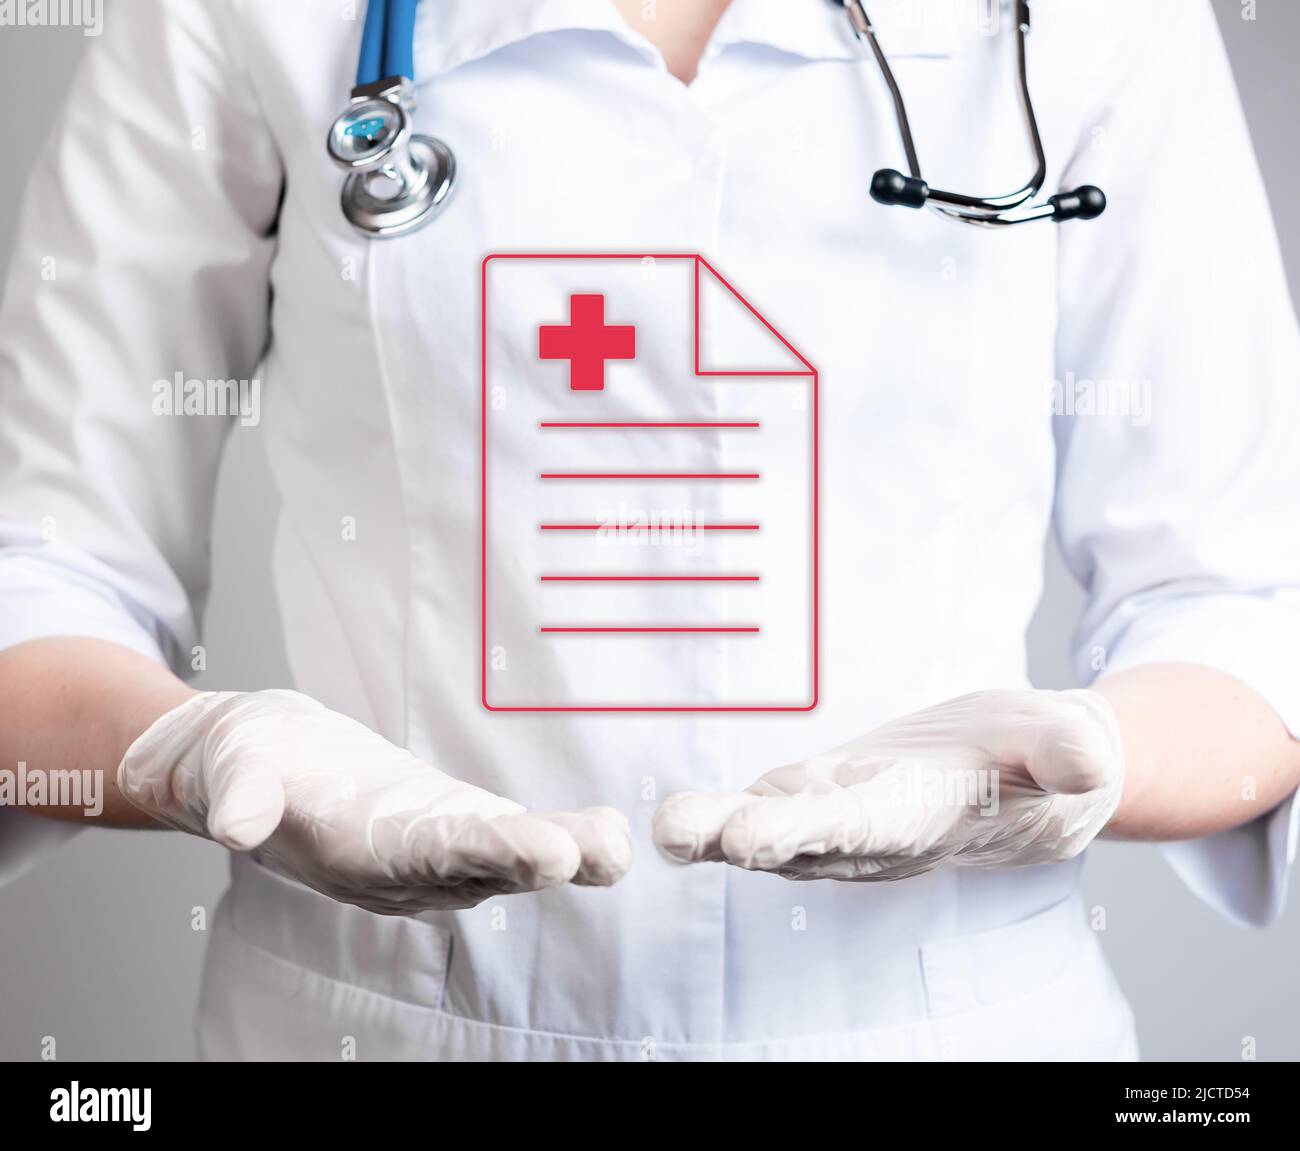 Virtual medical prescription, test results over doctor hands. Woman in lab coat with stethoscope holding document with patient diagnosis, treatment history, recommendations for illness cure. photo Stock Photo